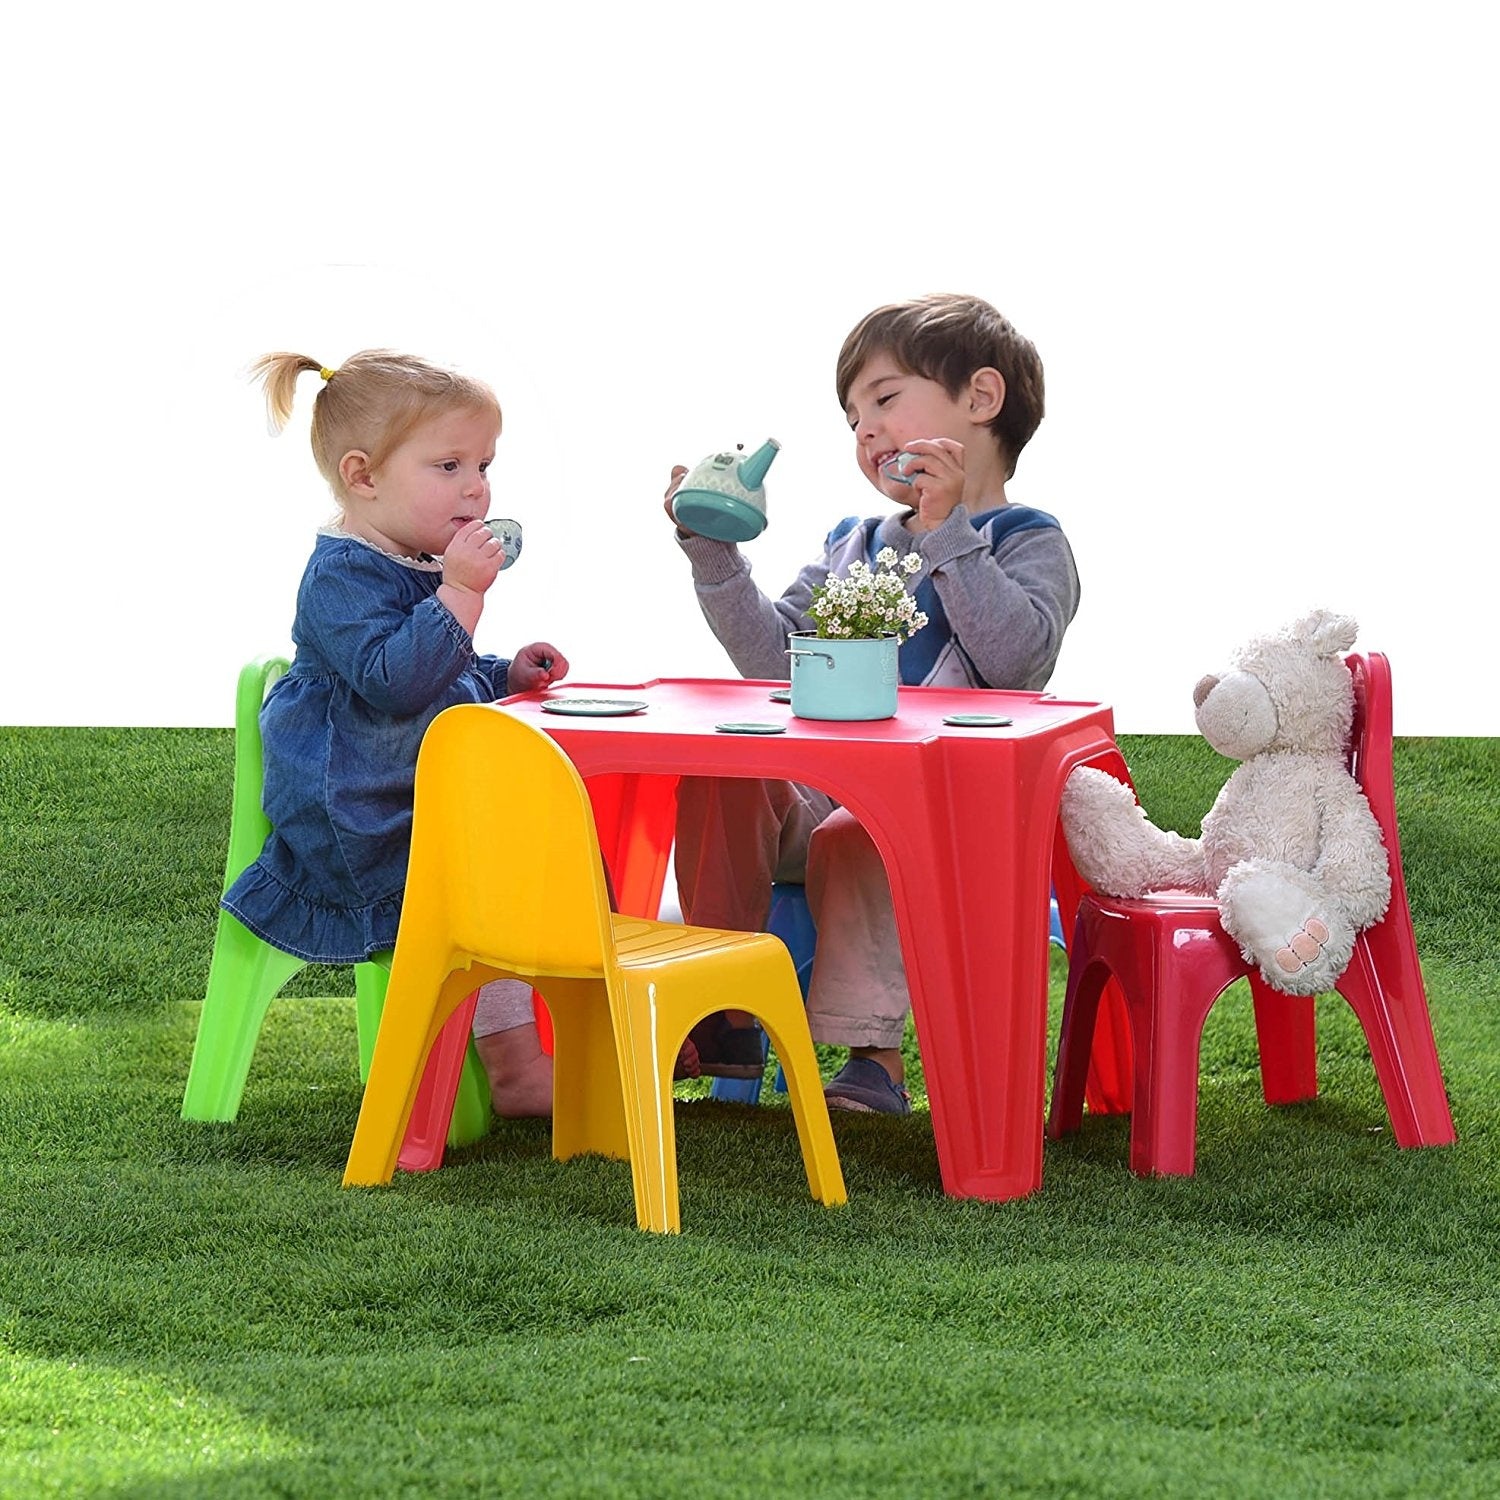 Starplay Keren set - A Perfect Table & Chair Set for Kids